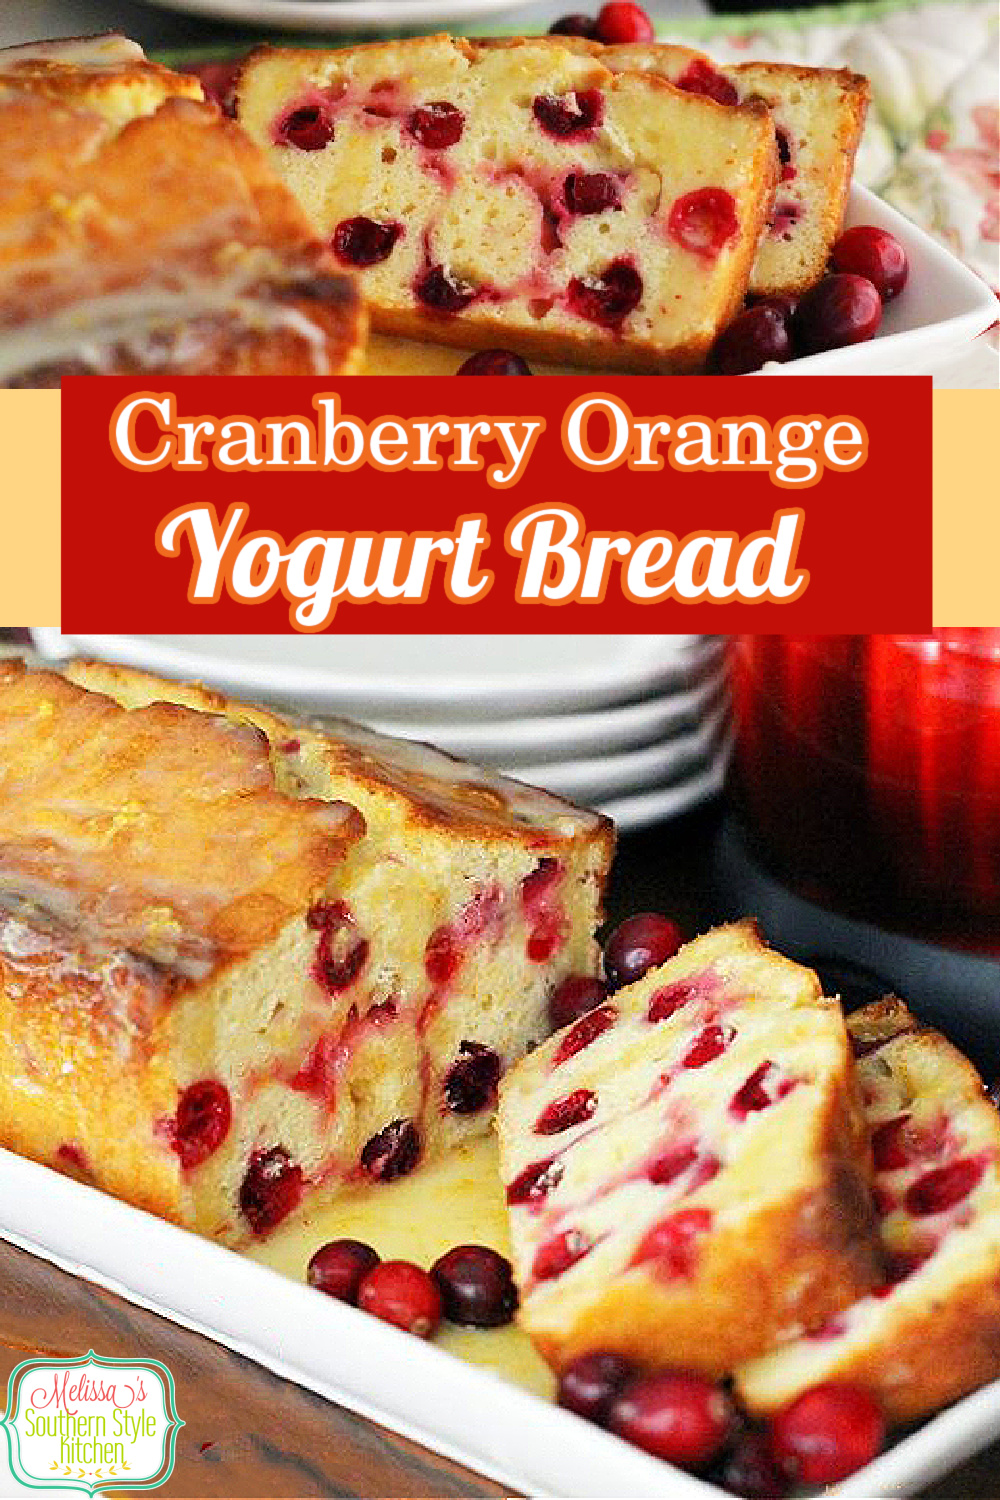 Freshly baked Cranberry Orange Yogurt Bread pairs perfectly with a cup of coffee or tea #cranberryorangebread #cranberries #cranberrybread #cranberrycakes #easybreadrecipes #yogurtbread #southernfood #southernrecipes #sweets #holidaybaking #holidays #christmasbrunch #orange #desserts #brunch #breakfast